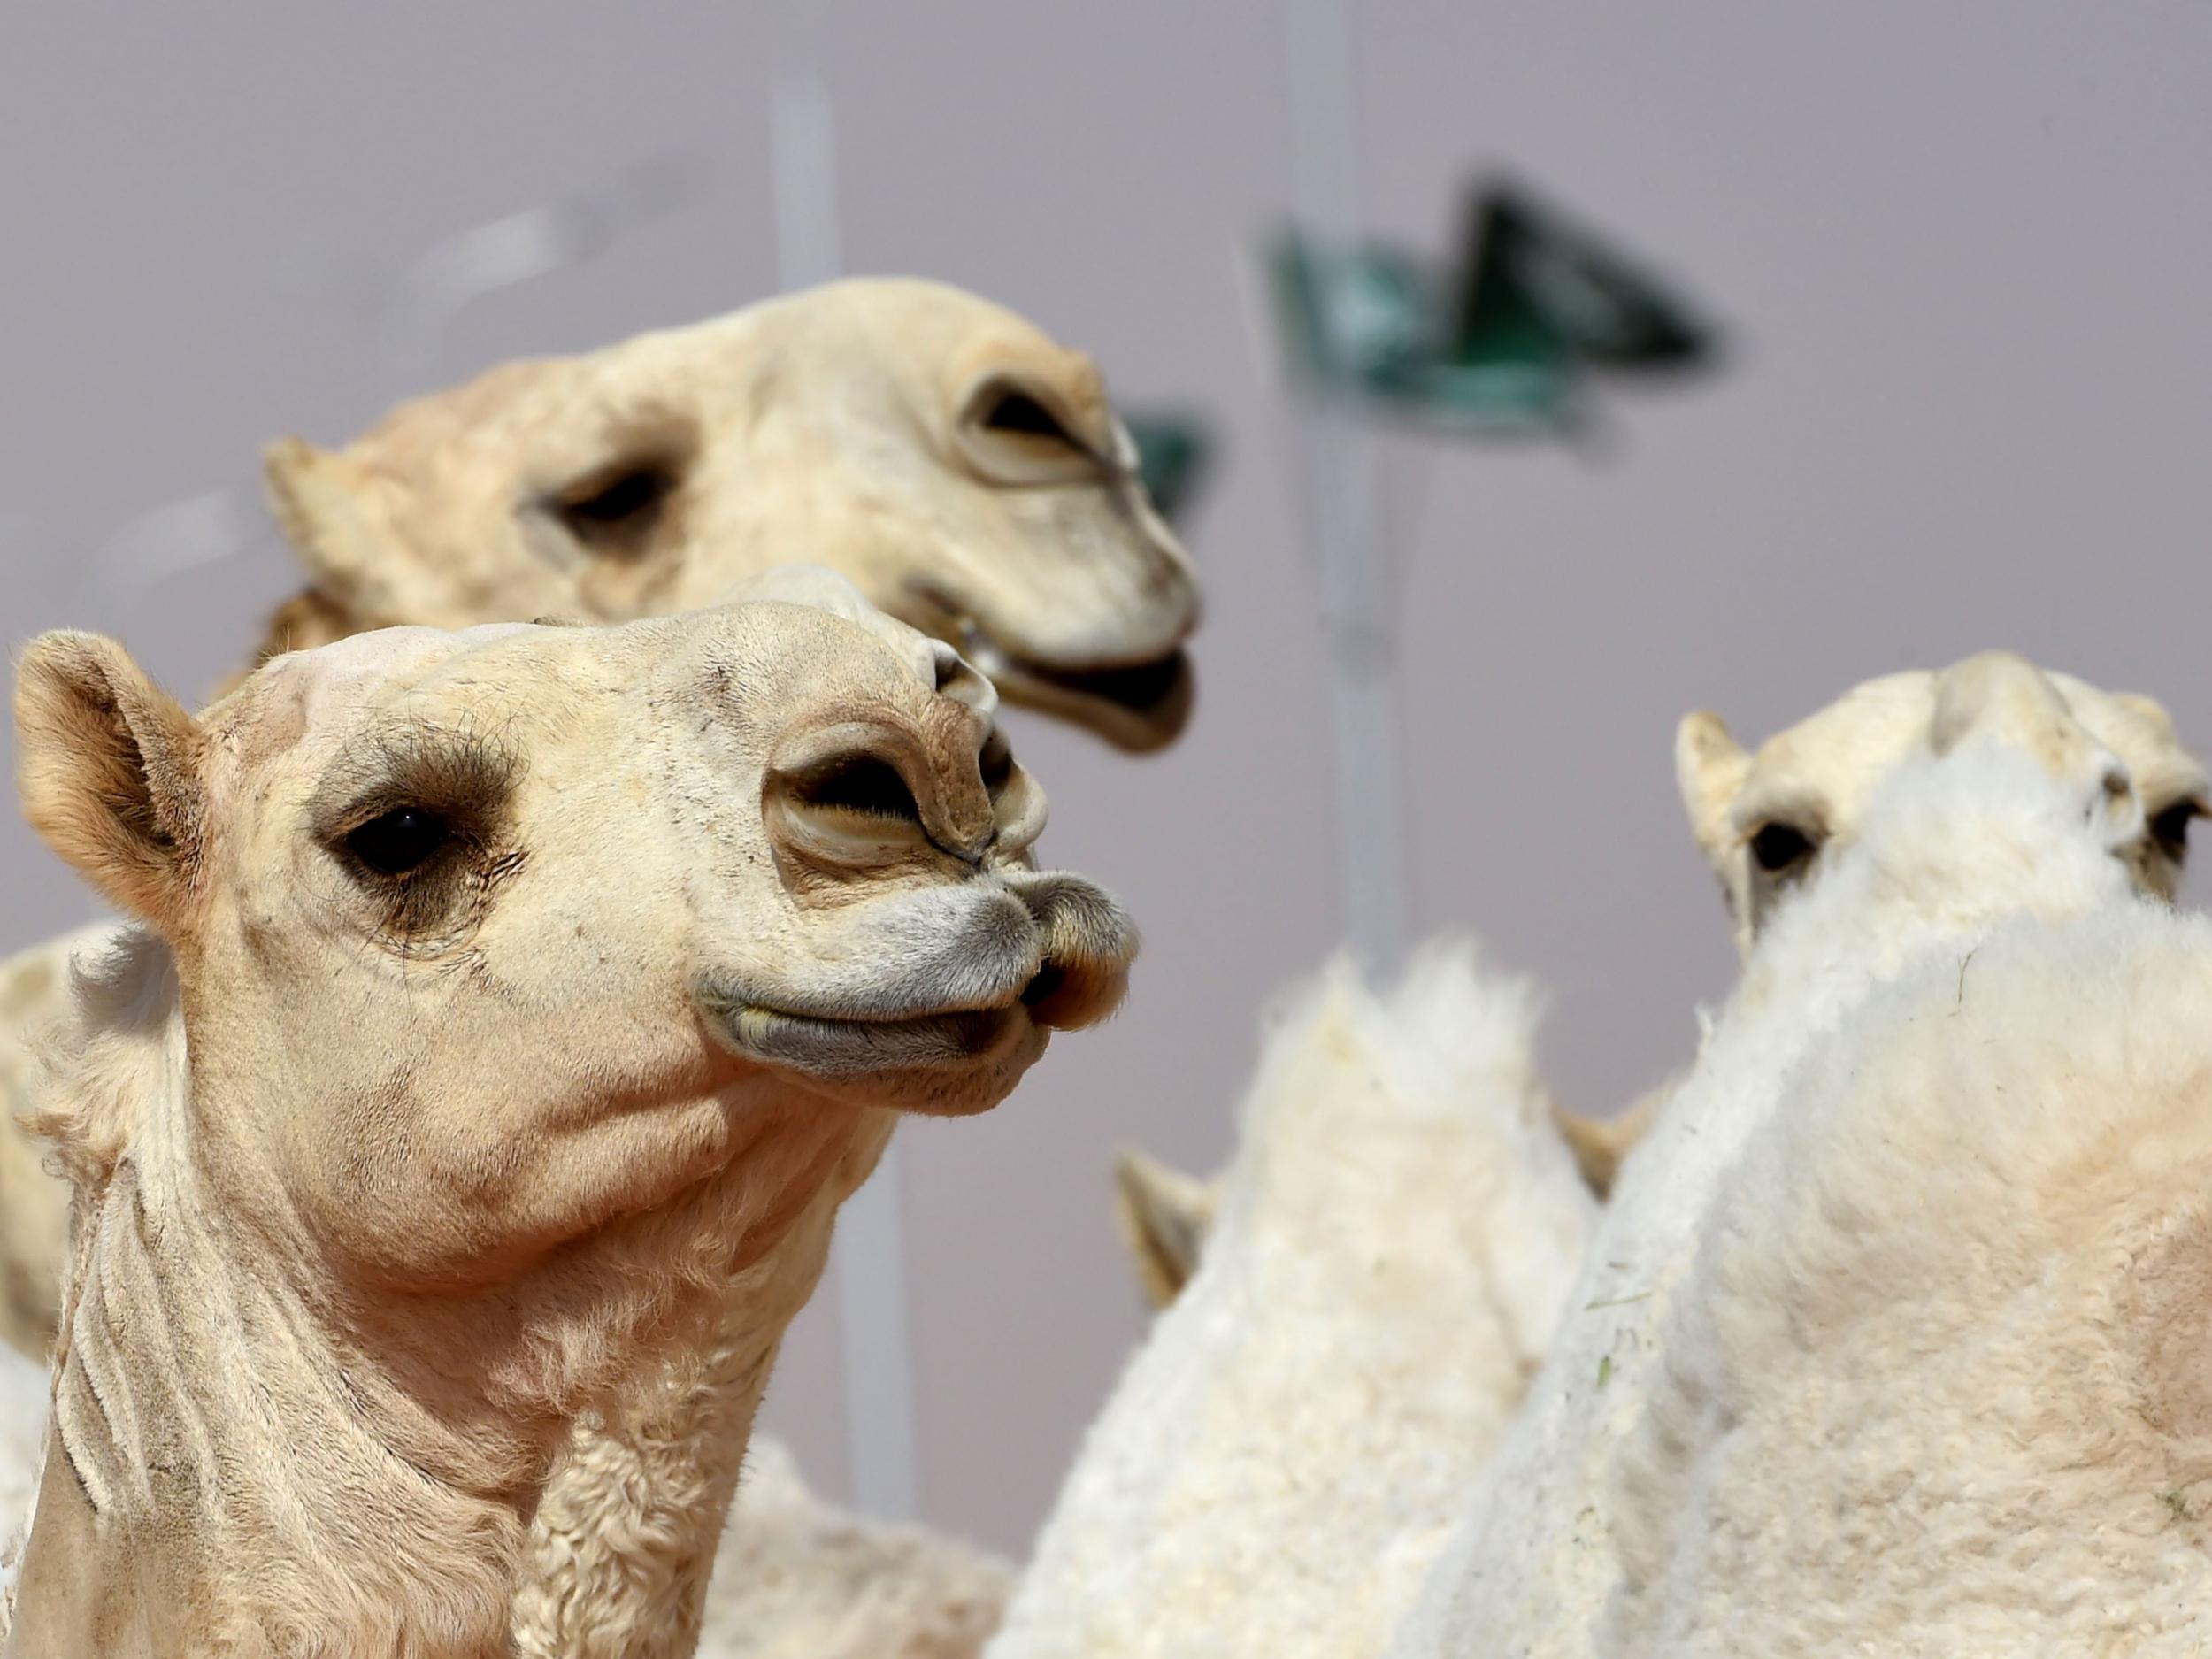 &#13;
Total cash prizes for owners of winning camels amounted to £21.3 million &#13;